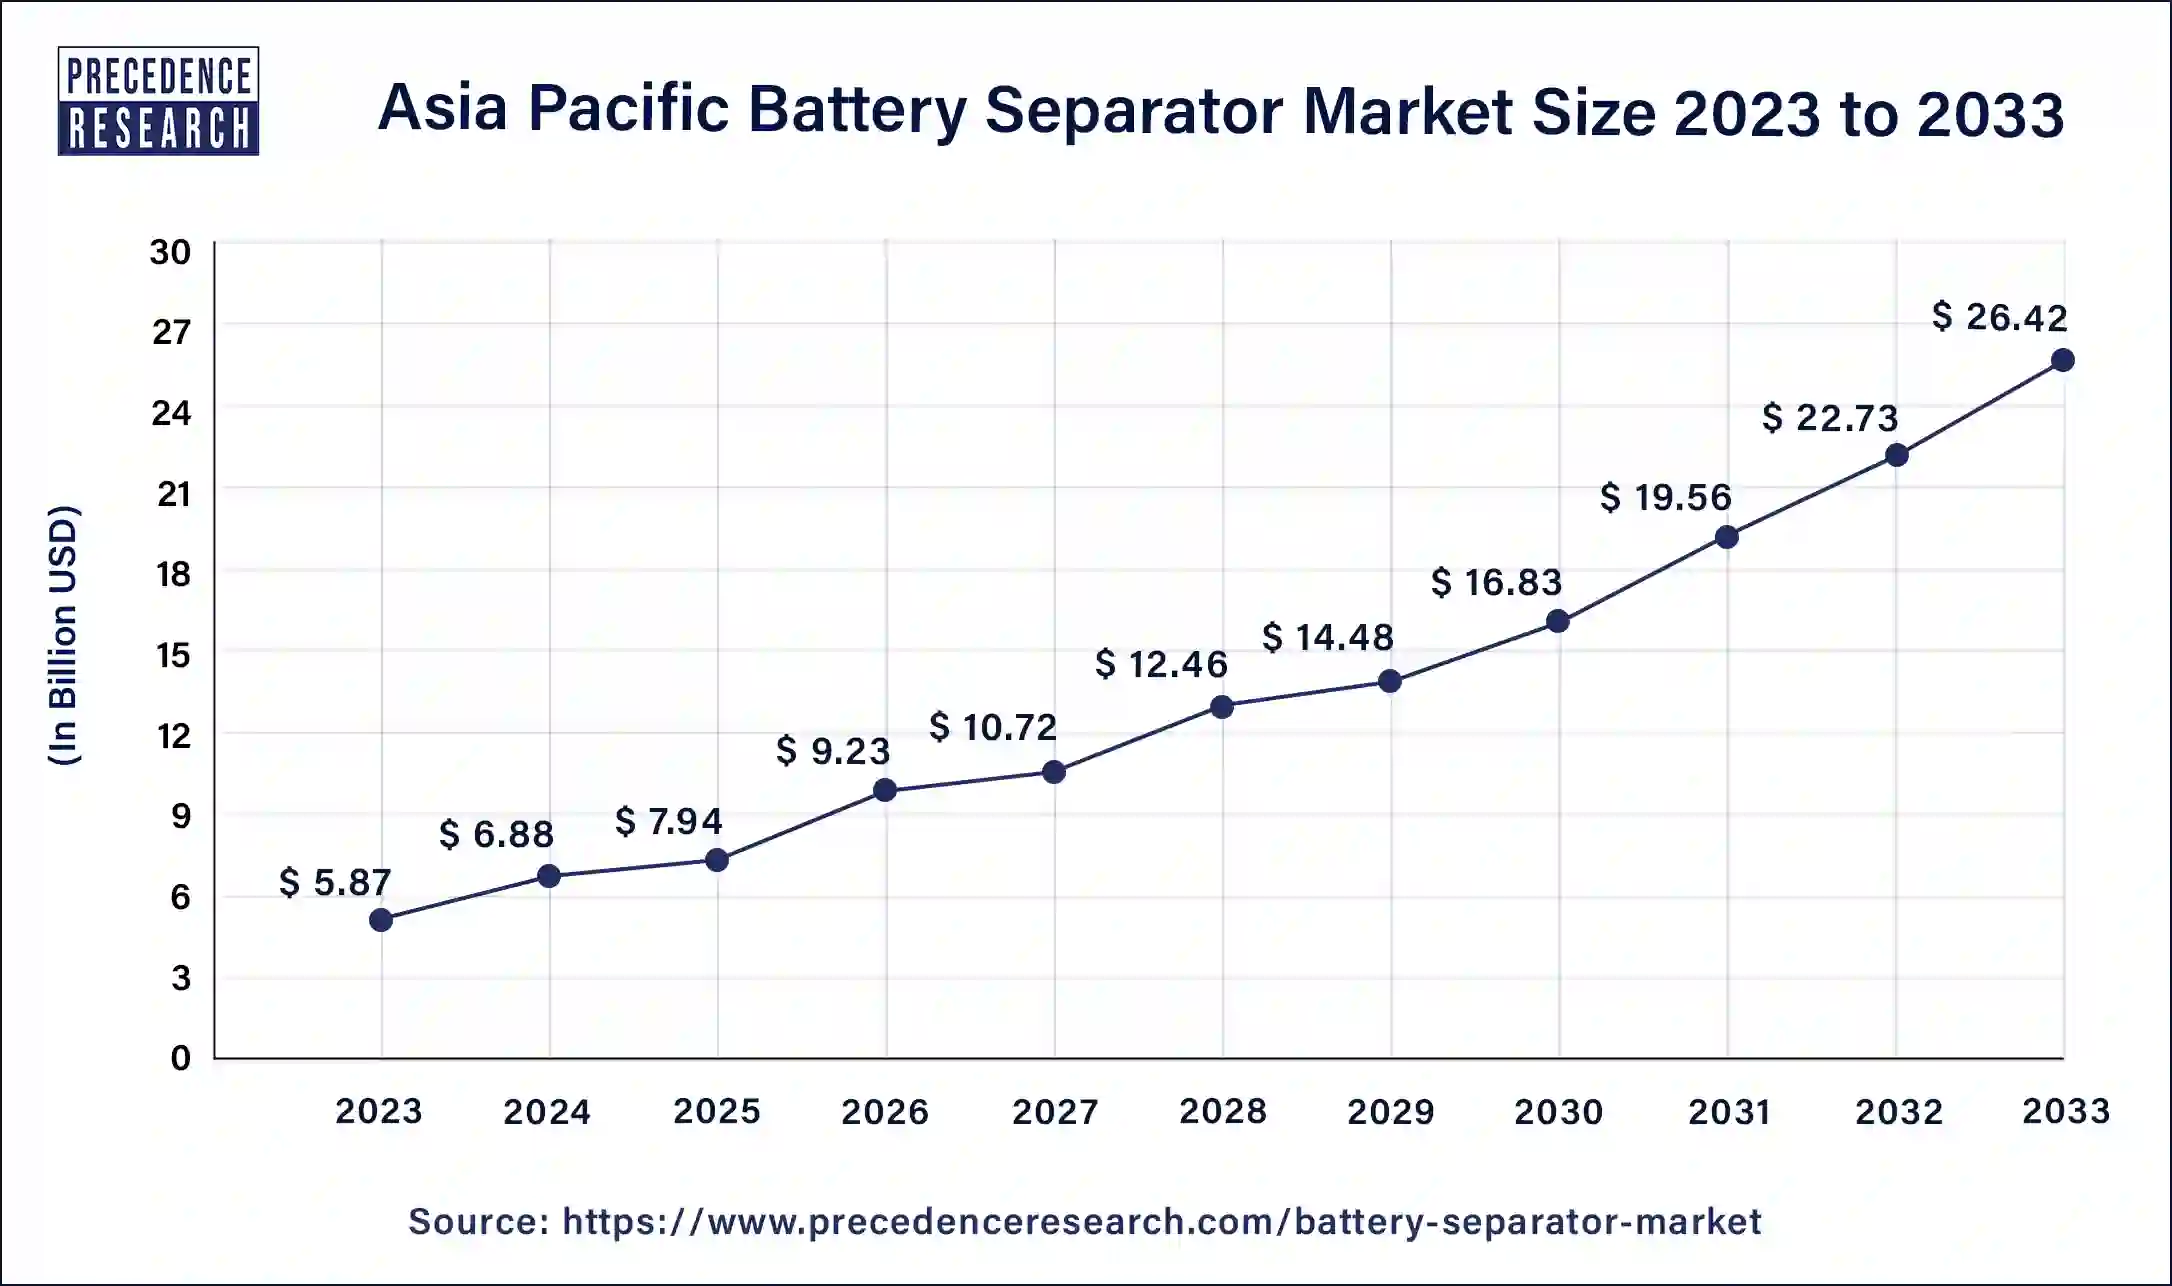 Asia Pacific Battery Separator Market Size 2024 to 2033